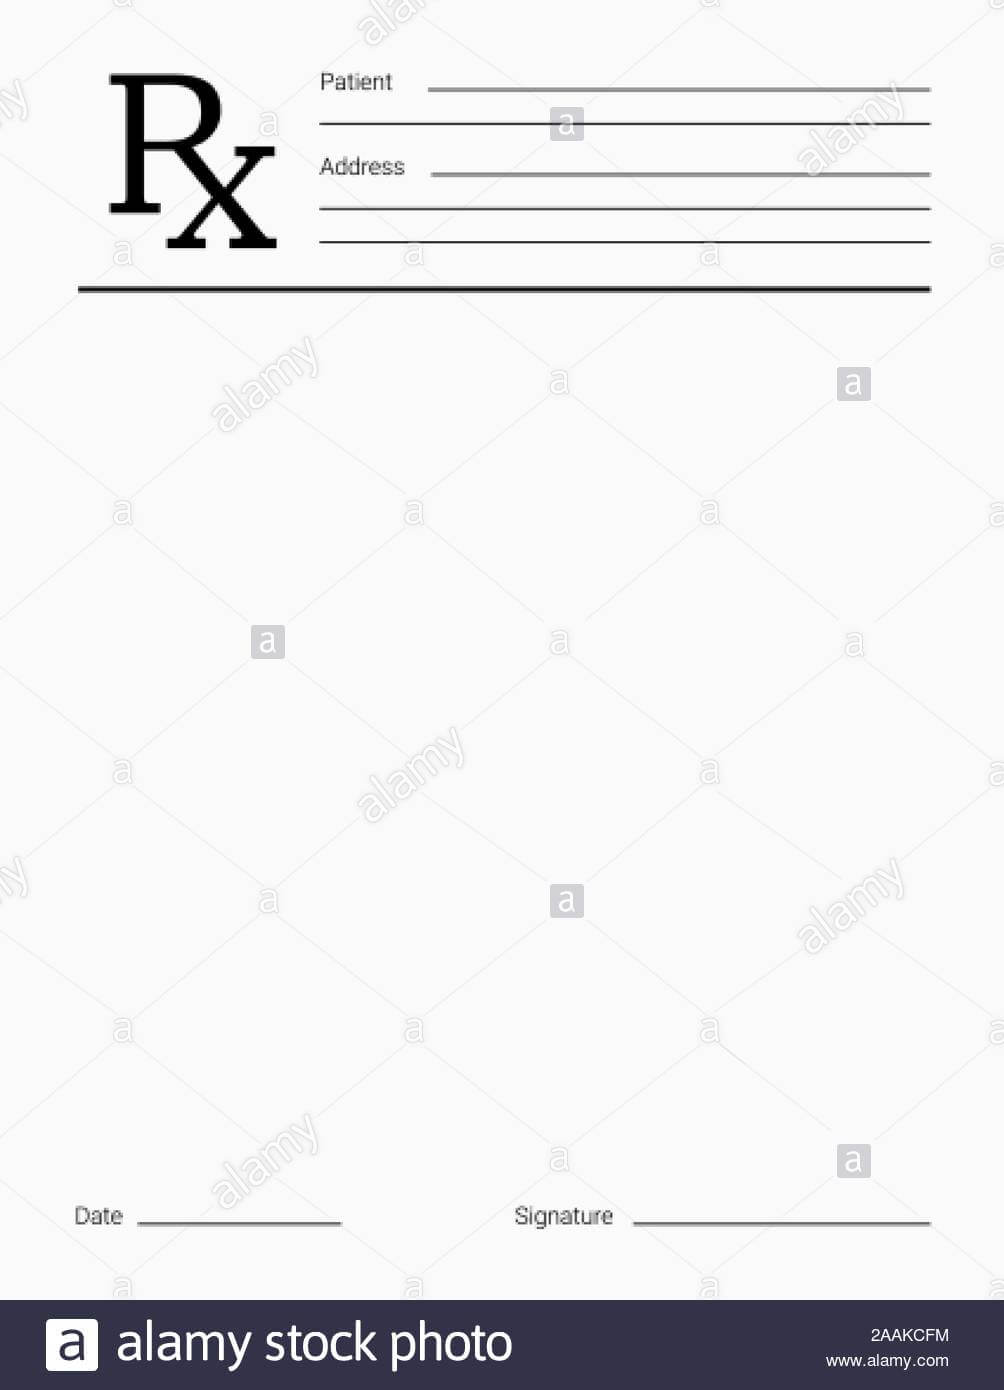 Doctor's Rx Pad Template. Blank Medical Prescription Form Intended For Blank Prescription Pad Template